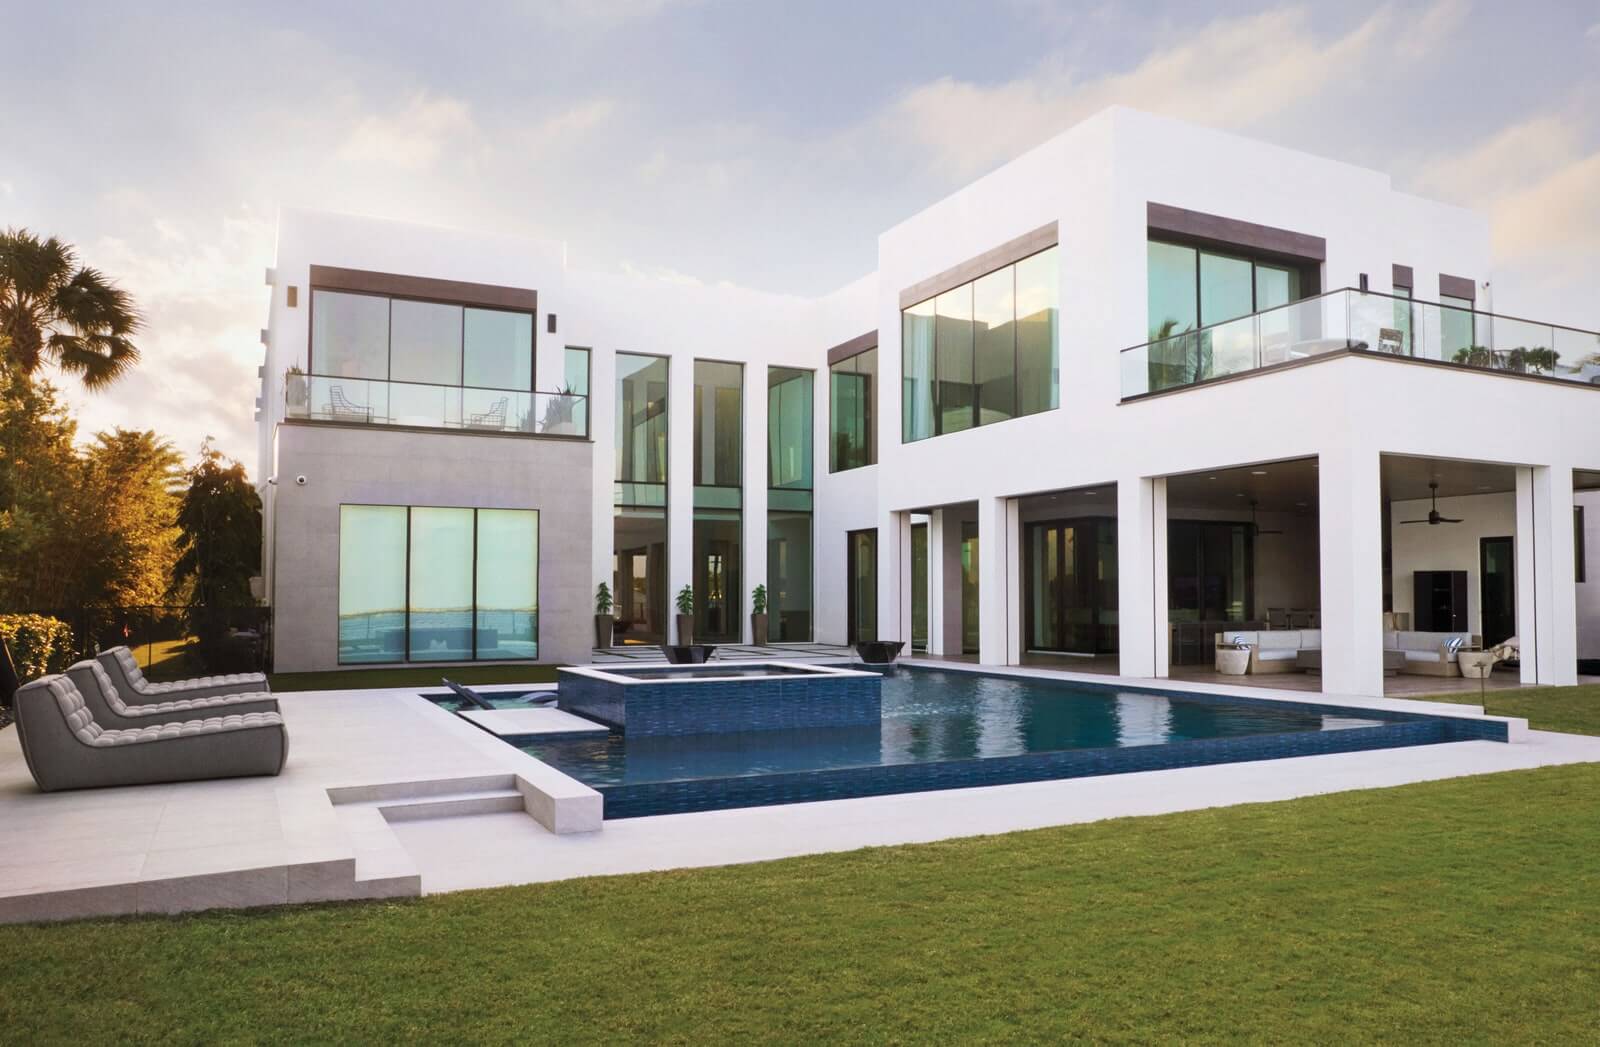 Serena Williams new home in Florida with an infinite pool and a big outdoor space